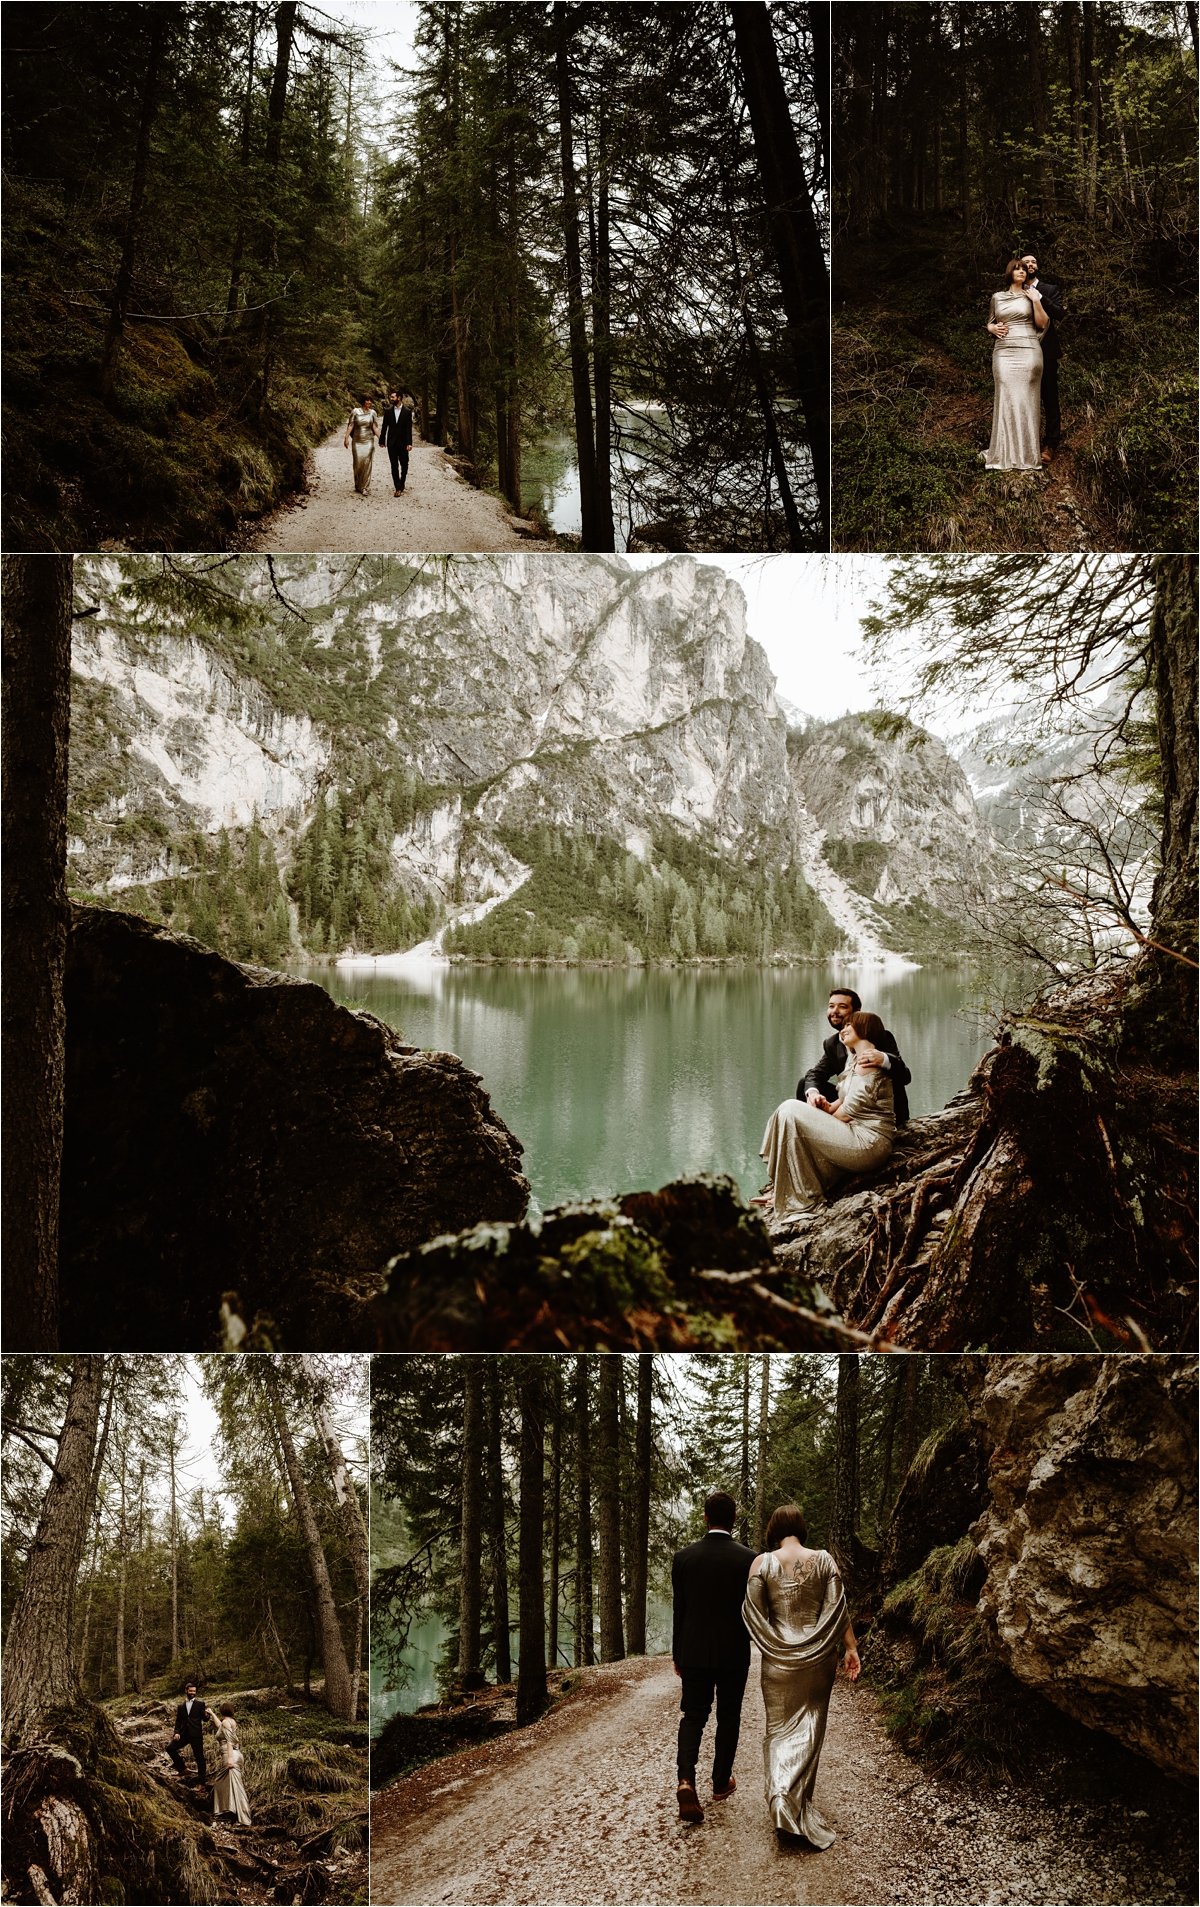 Hiking around Lake Braies in the Italian Alps, Laurel & Dustin explore the forests around the lake for their post-wedding adventure session. Photo by Wild Connections Photography